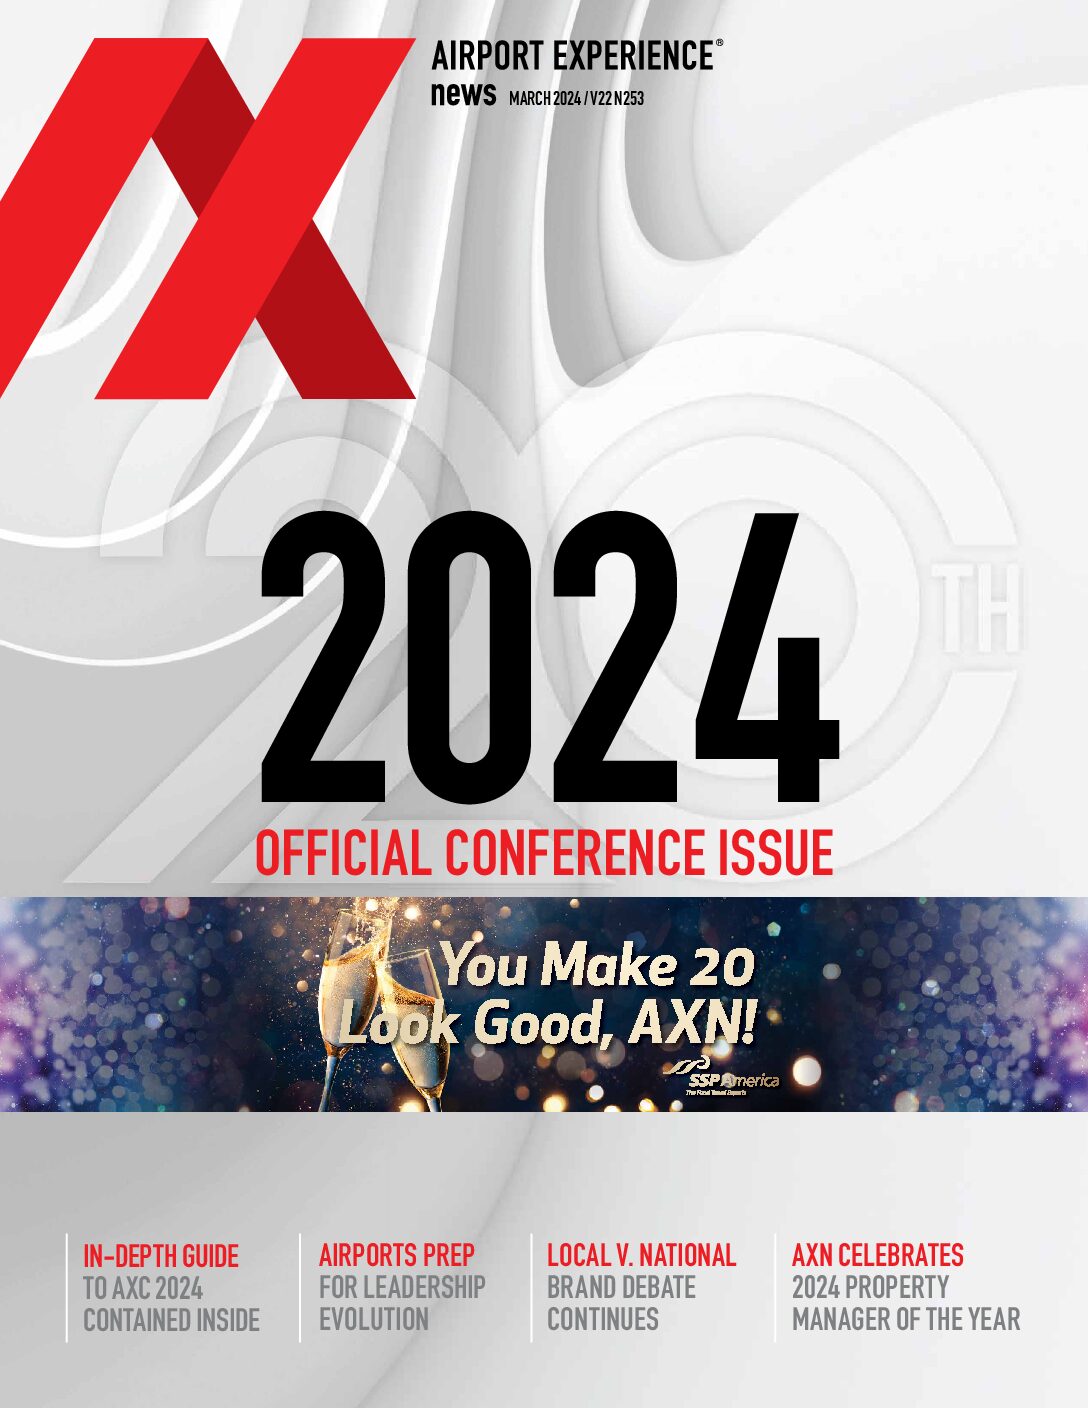 Airport Experience News Magazine | Conference Issue 2024